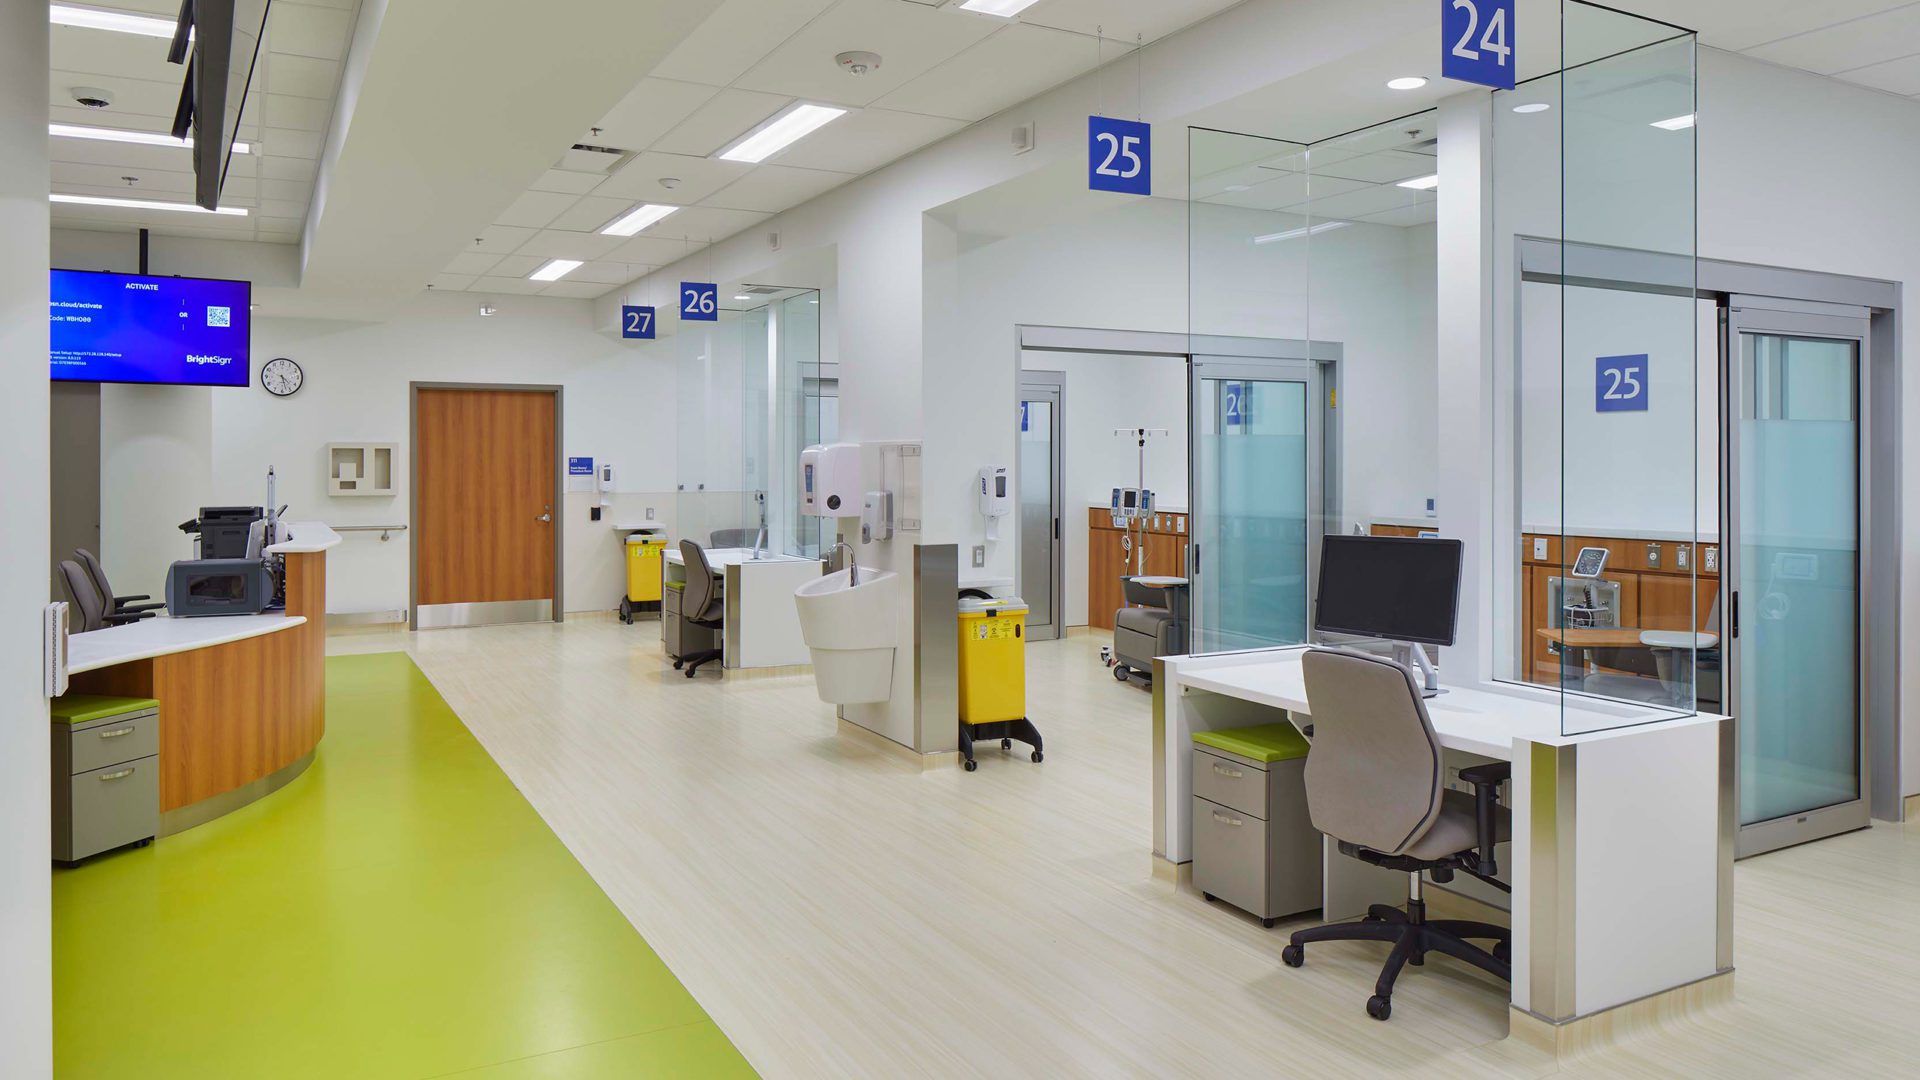 interior of kidney care center. view of desks and chairs